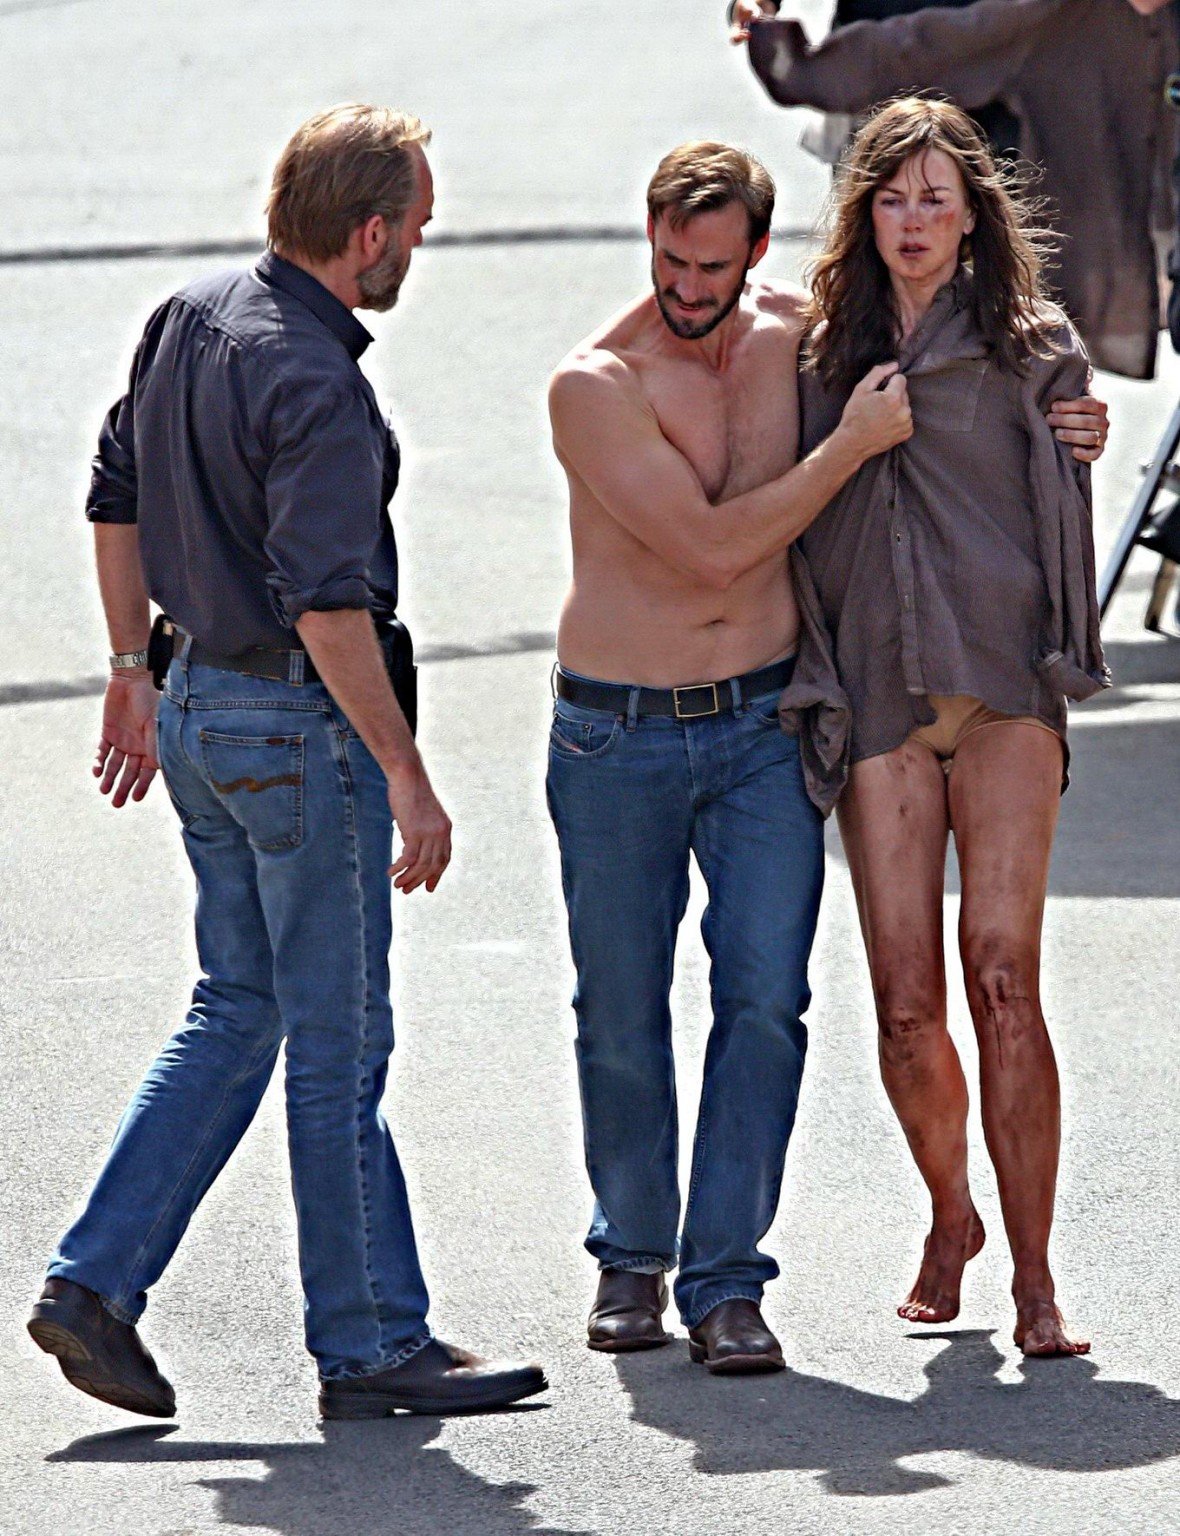 Nicole Kidman all dirty wearing panties and shirt on the Strangerland set in Can #75197968